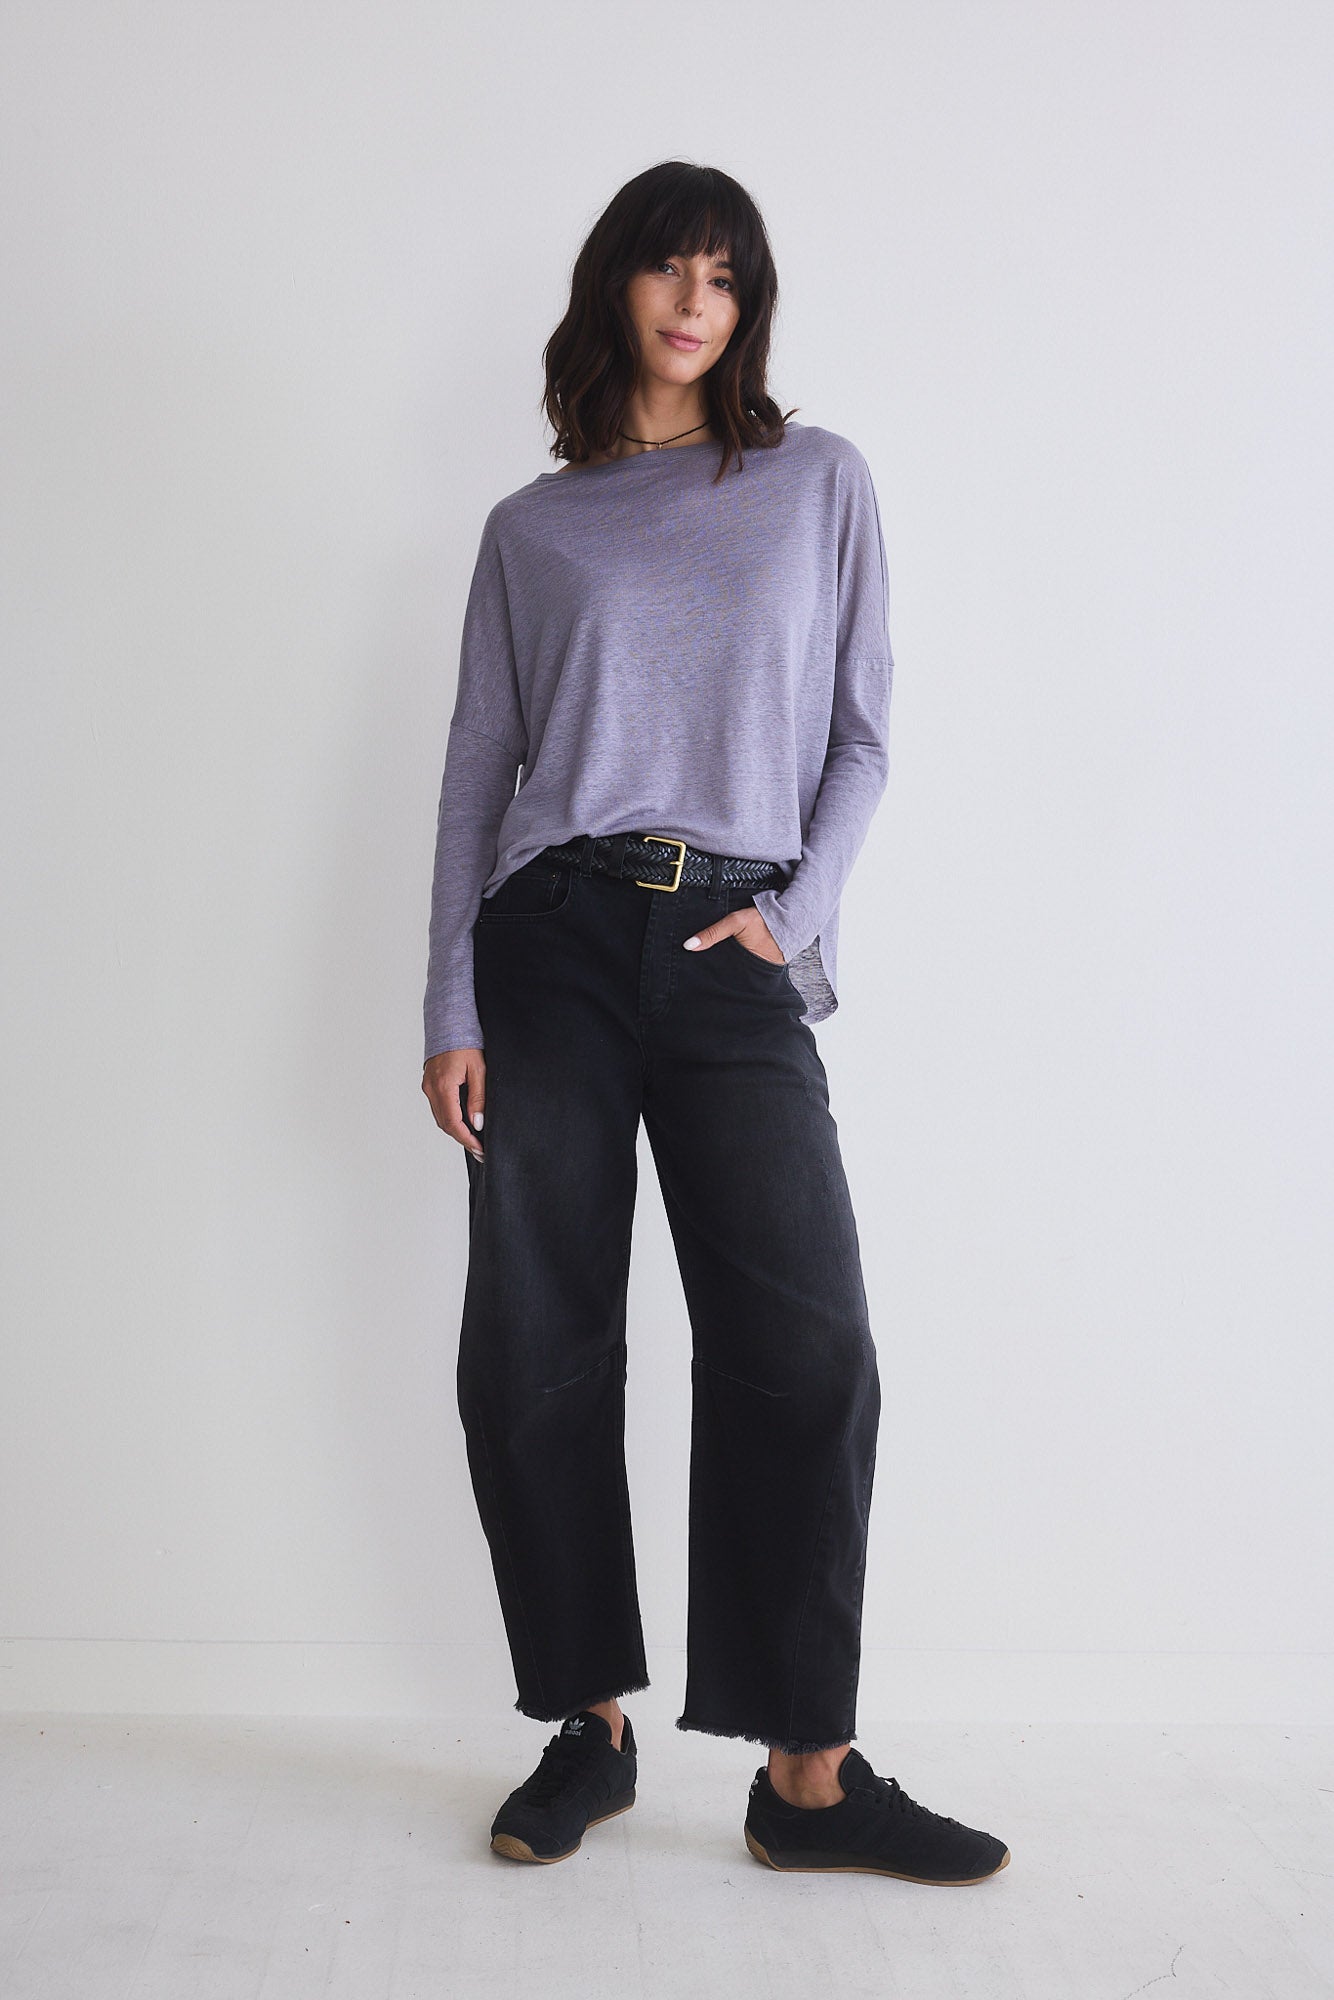 All Intents Slouchy Long Sleeve Top